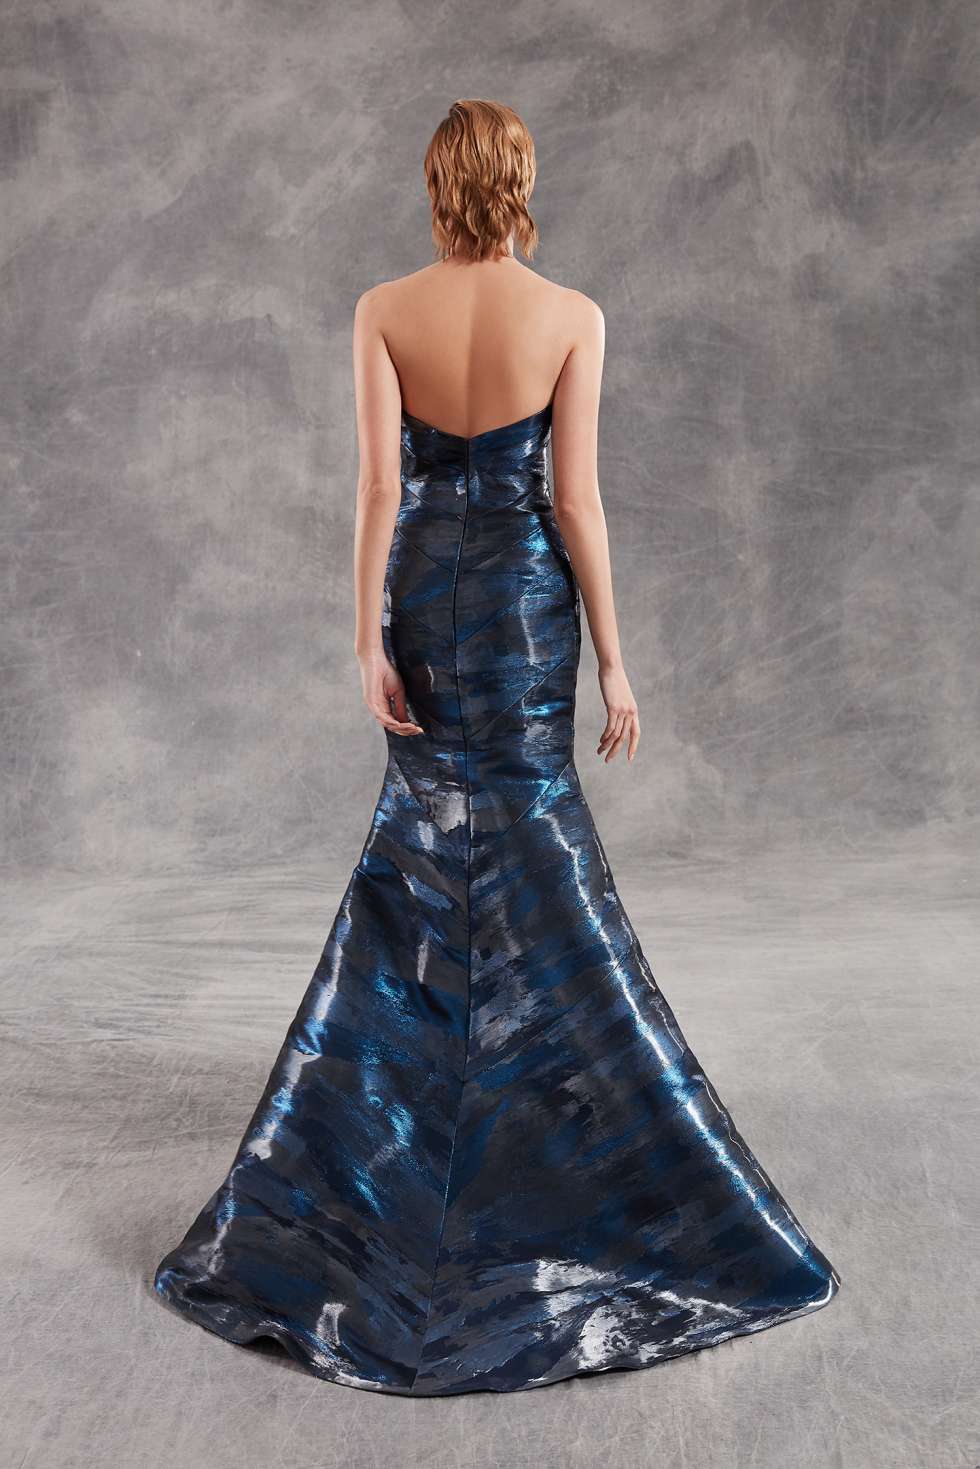 Your Engagement Dress from The Peter Langer 2020 Spring/Summer Collection